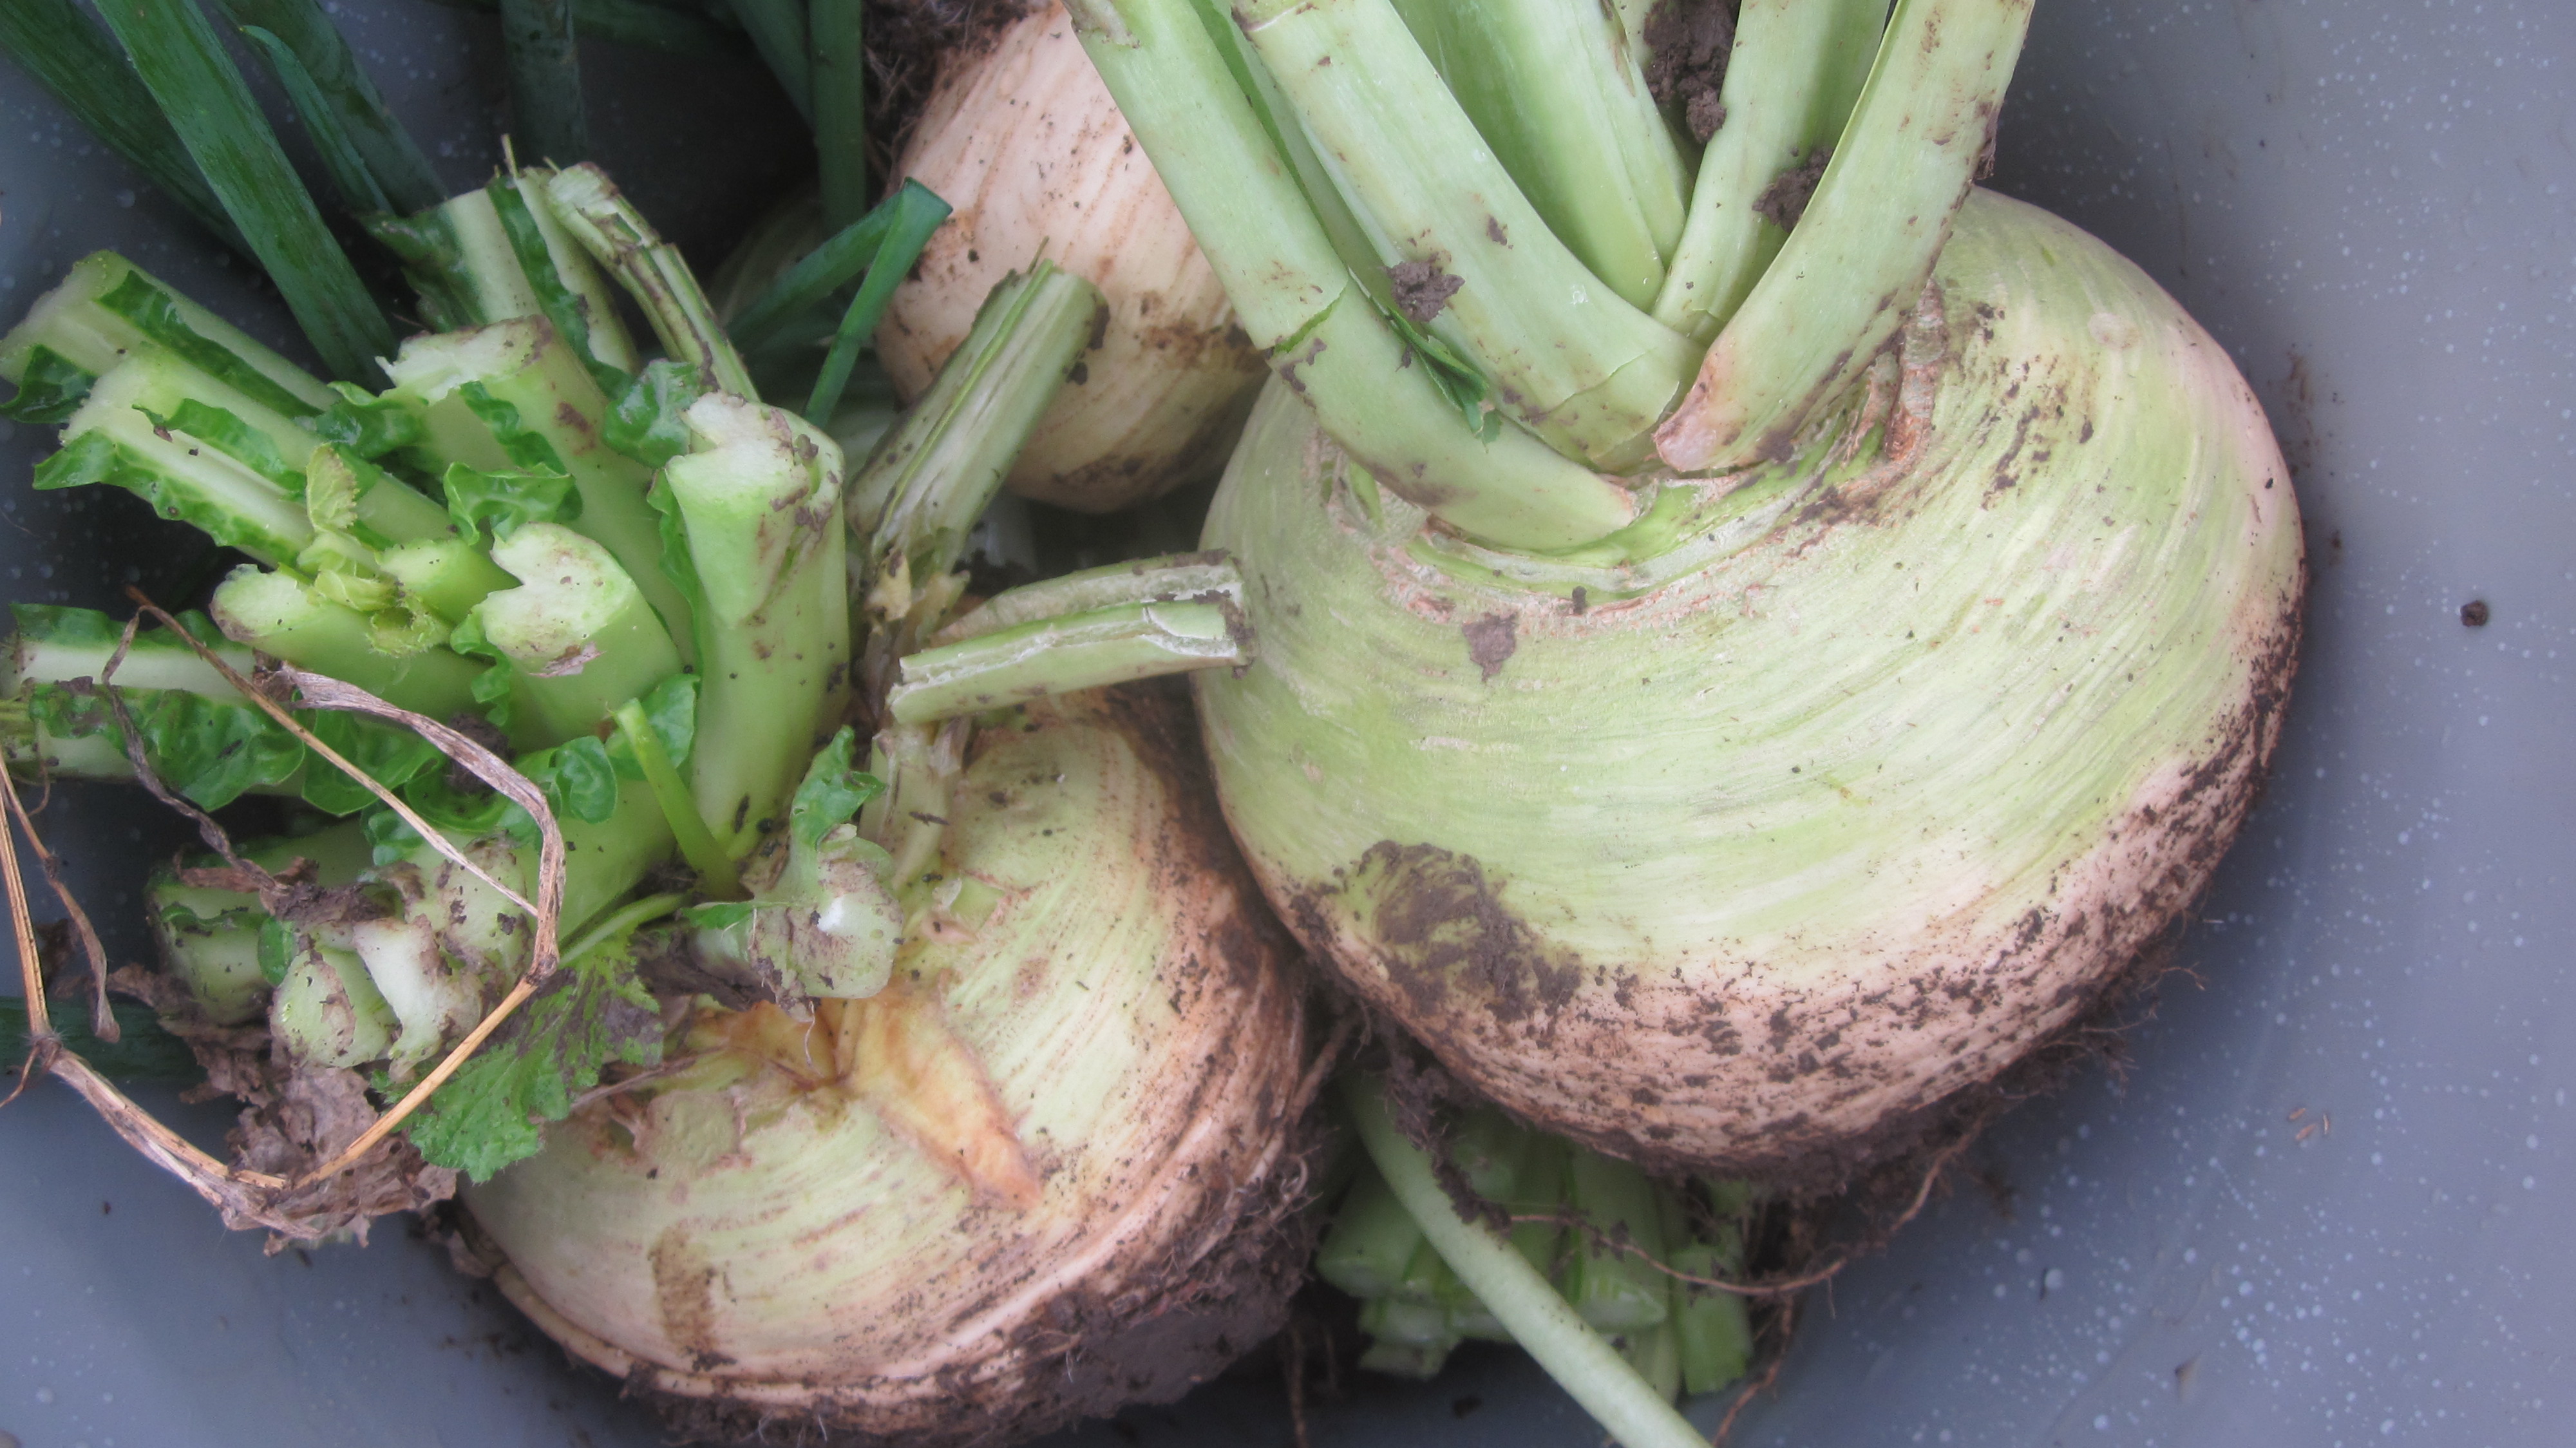 Best way to store turnips for winter & a fabulous roasted root recipe!